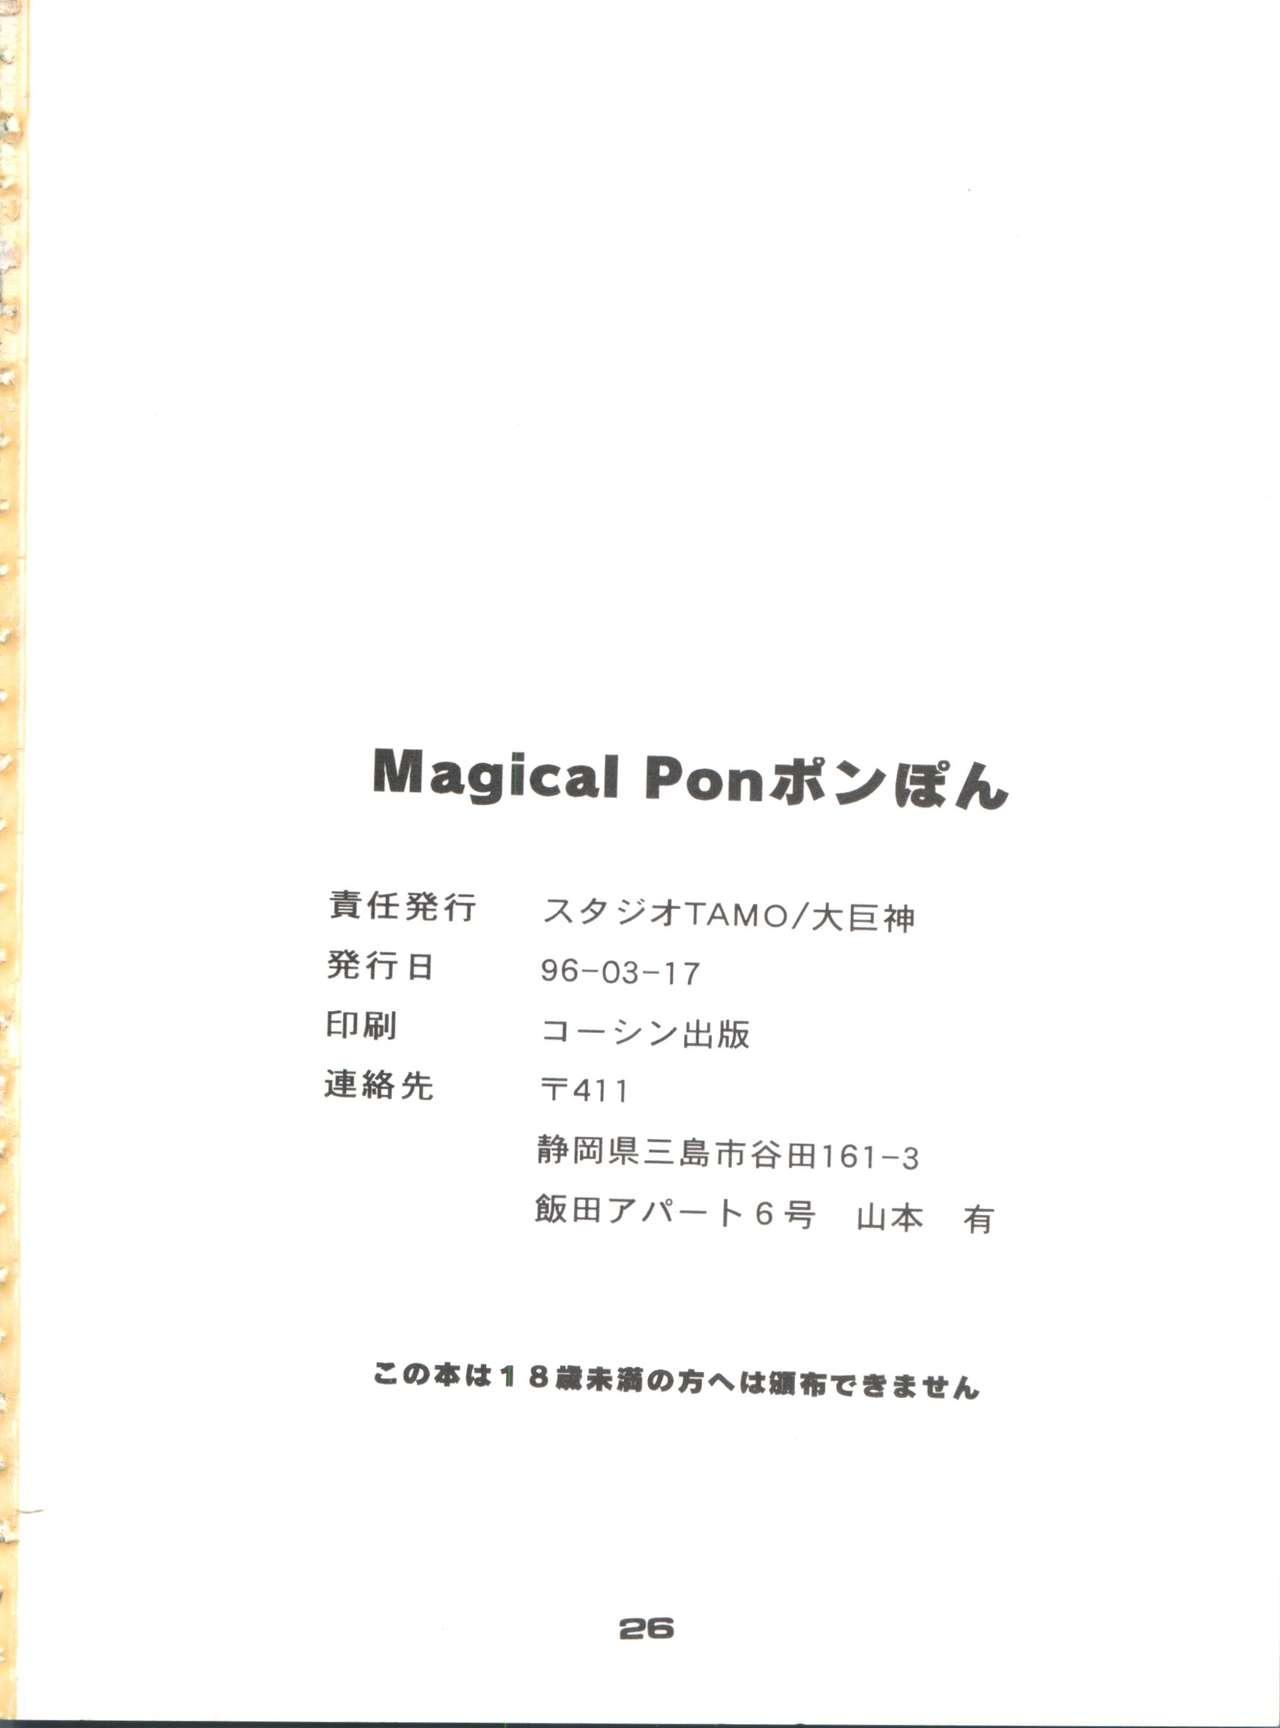 Movies Magical Ponponpon Returns - Magical emi Asians - Page 25